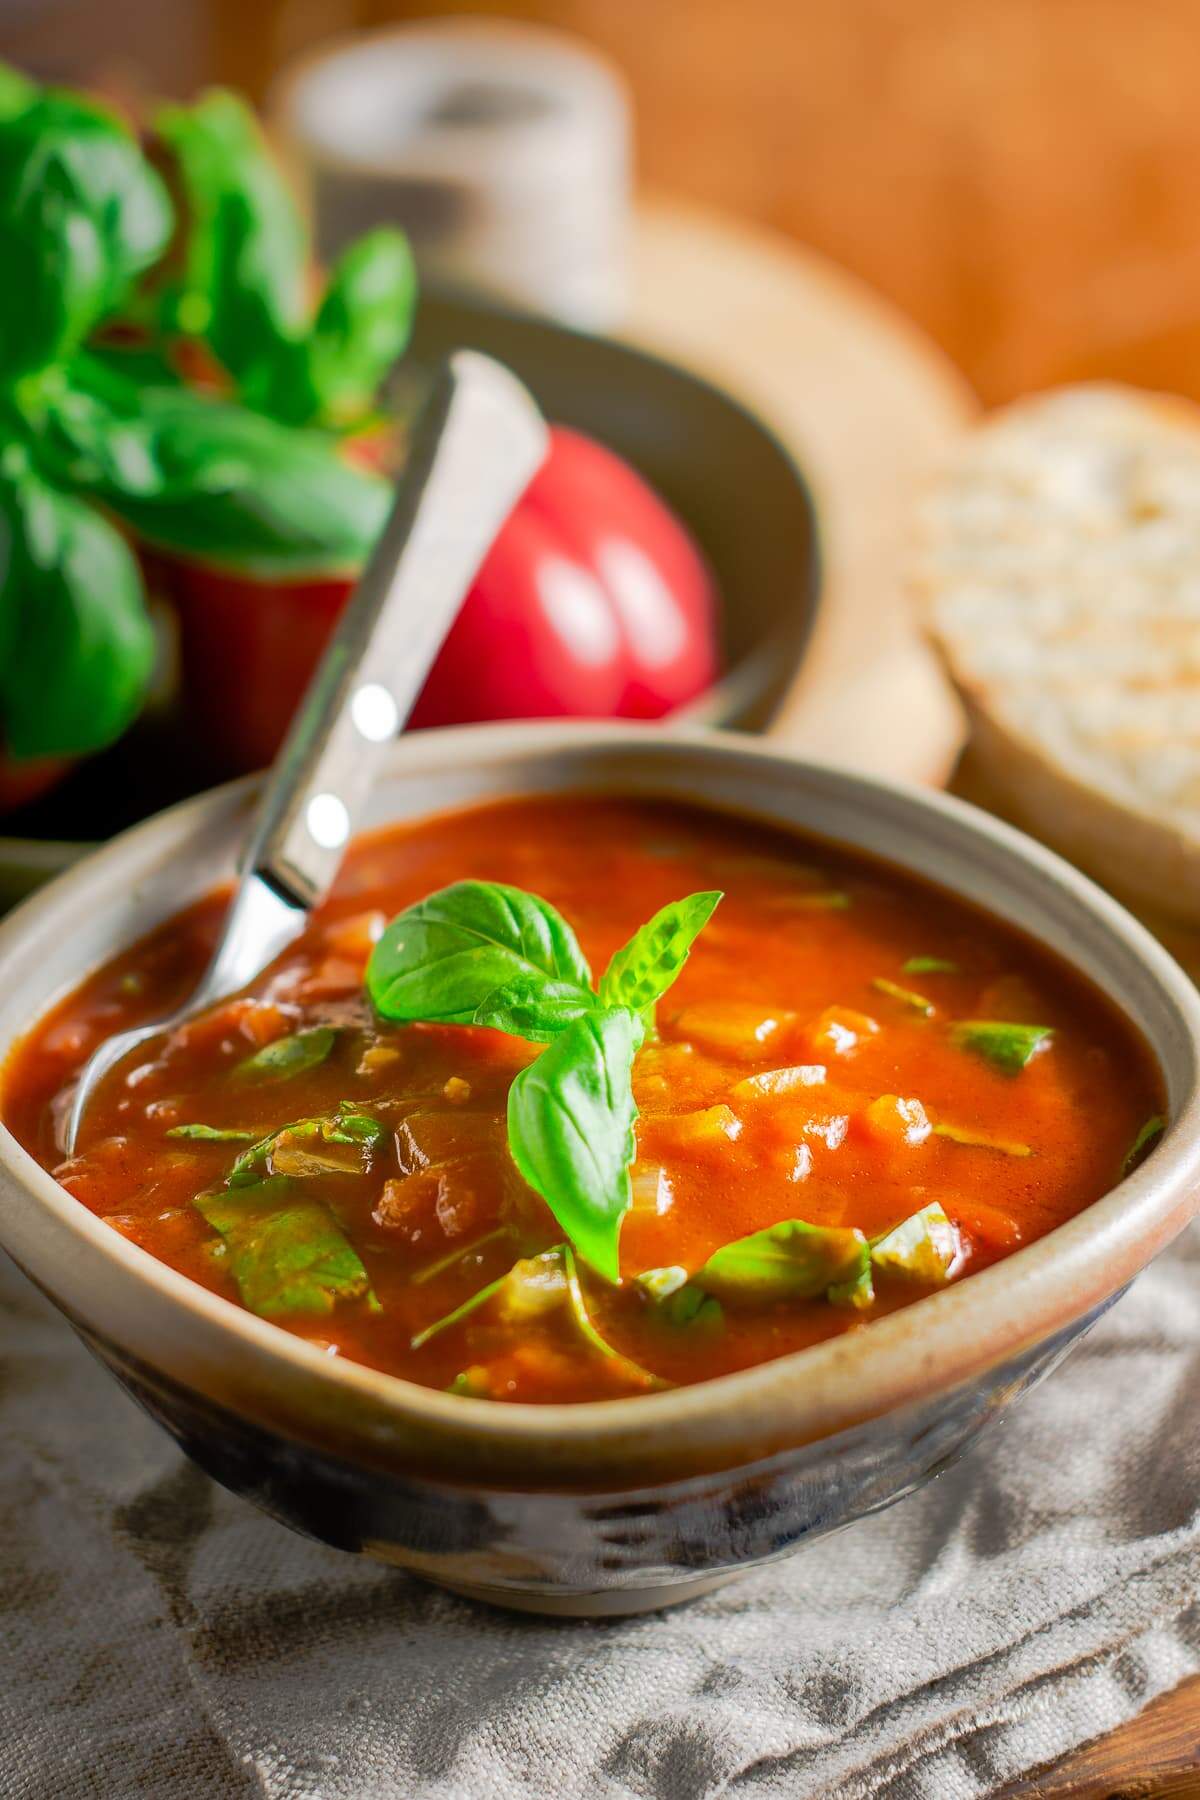 A bowl of fresh tomato & basil soup served with crusty toasted bread, topped with basil leaves and a wooden handle spoon inside the rustic bowl and fresh tomatoes to the back.